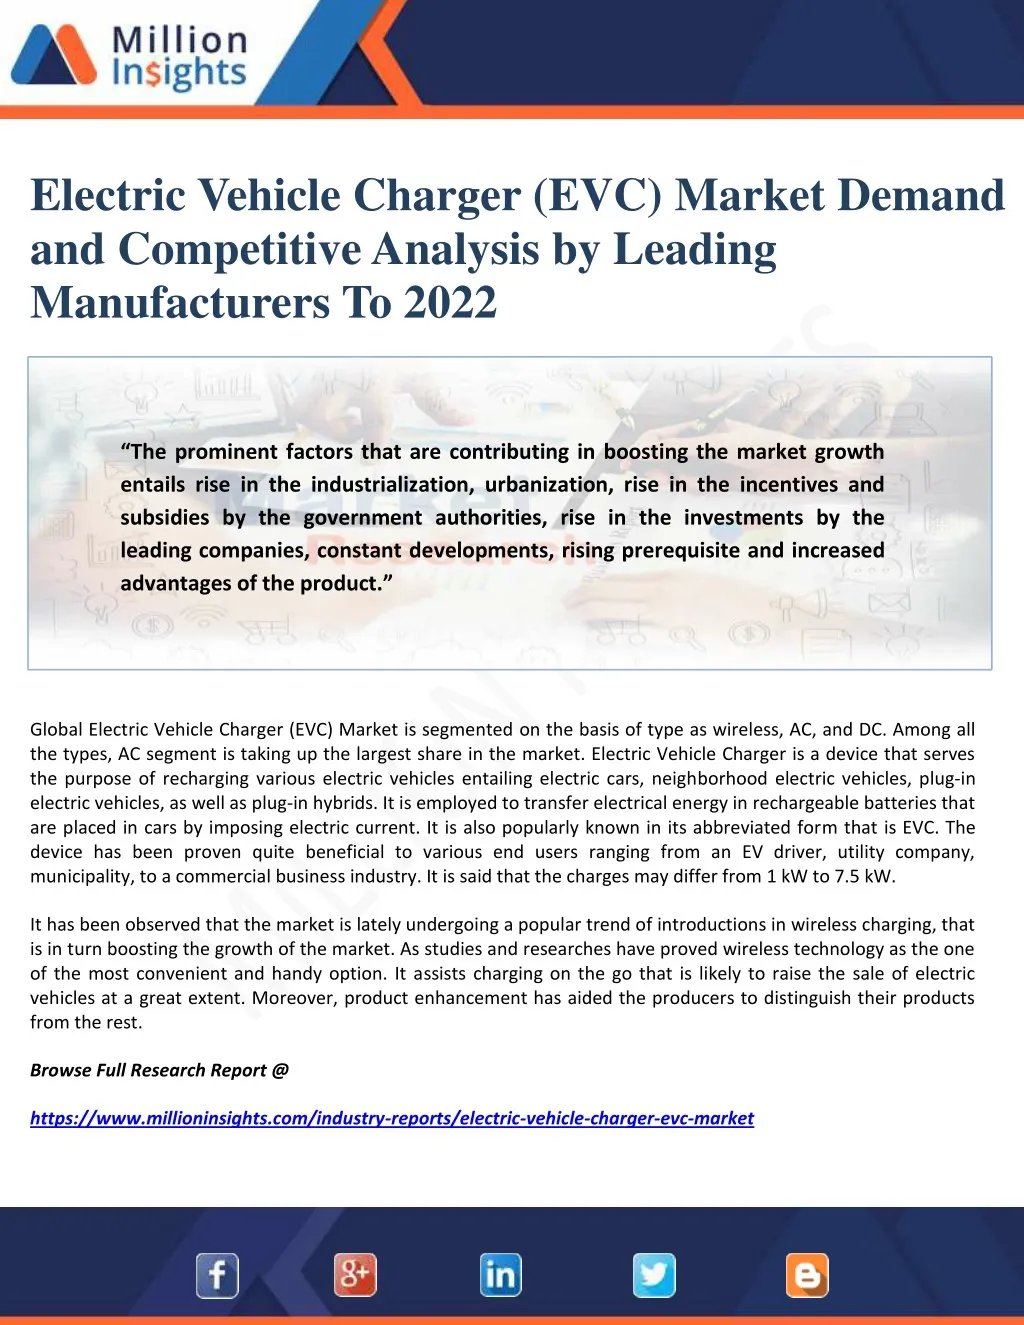 electric vehicle charger evc market demand